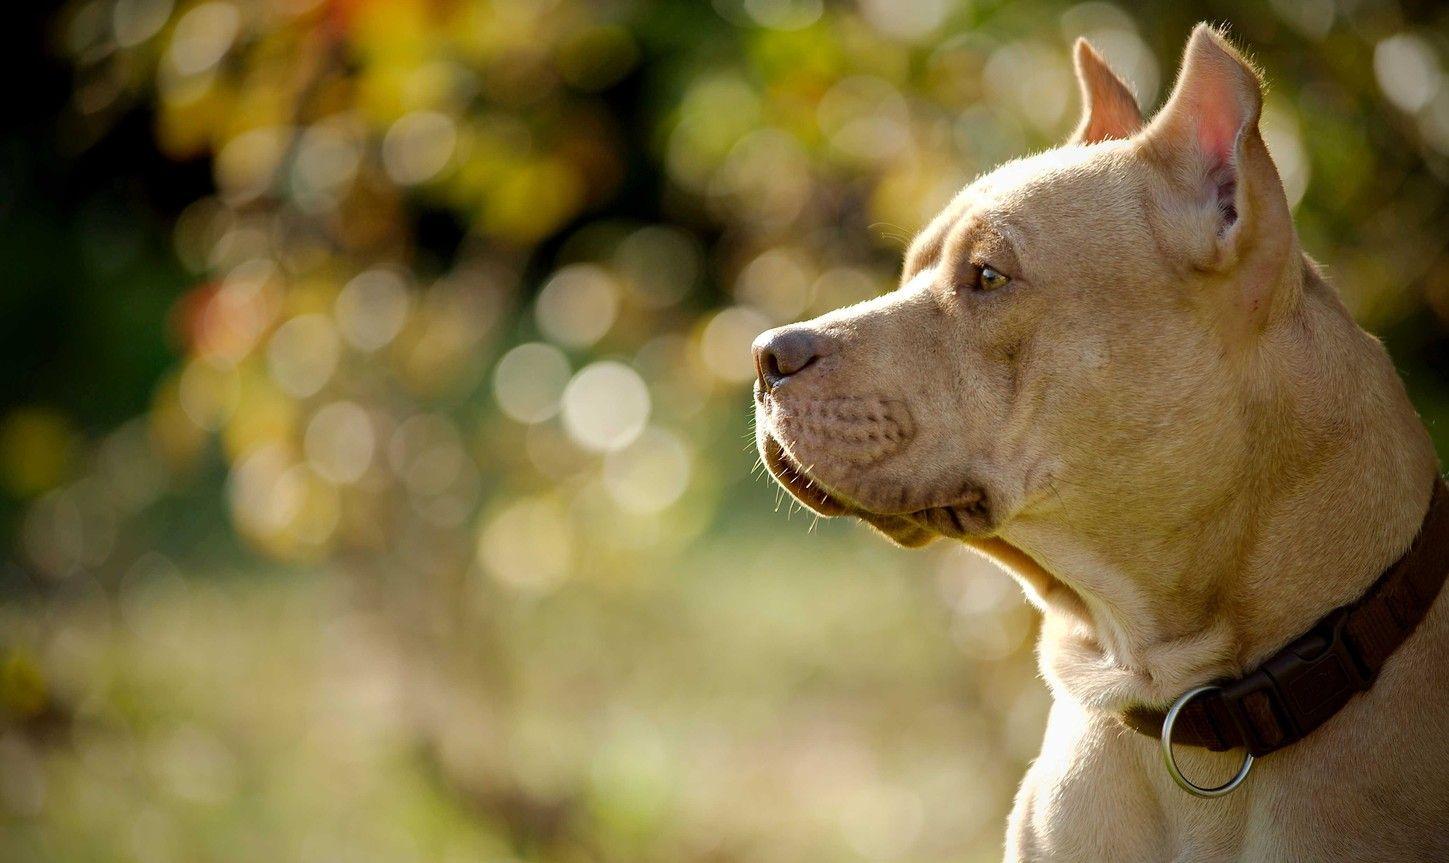 Cool High Quality Wallpaper's Collection: American Pitbull Dog